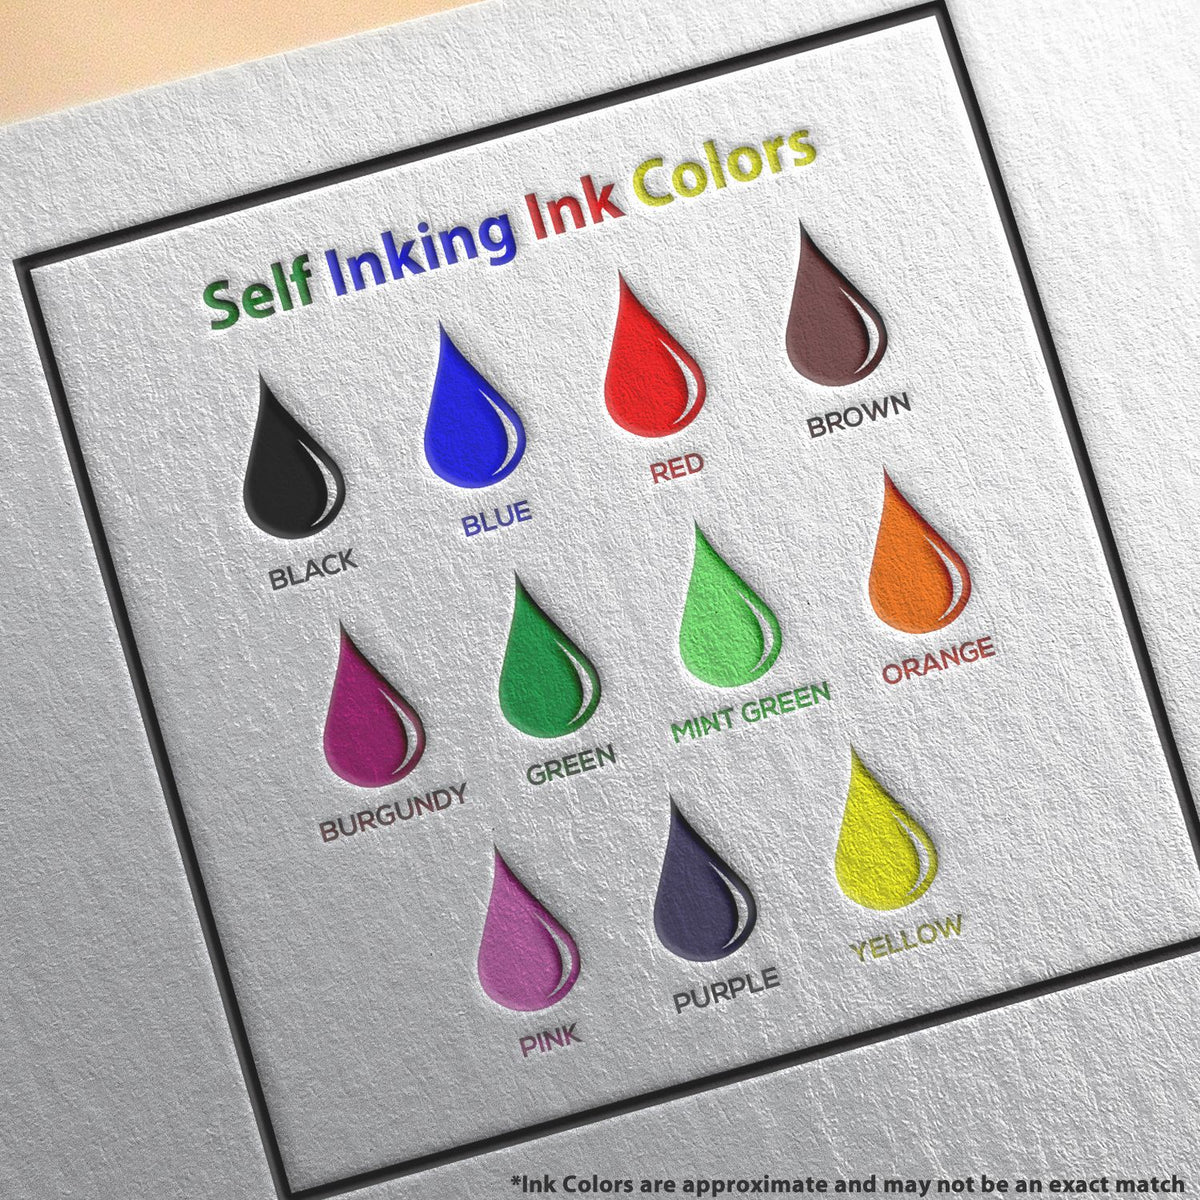 A picture showing the different ink colors or hues available for the Self-Inking Utah PE Stamp product.